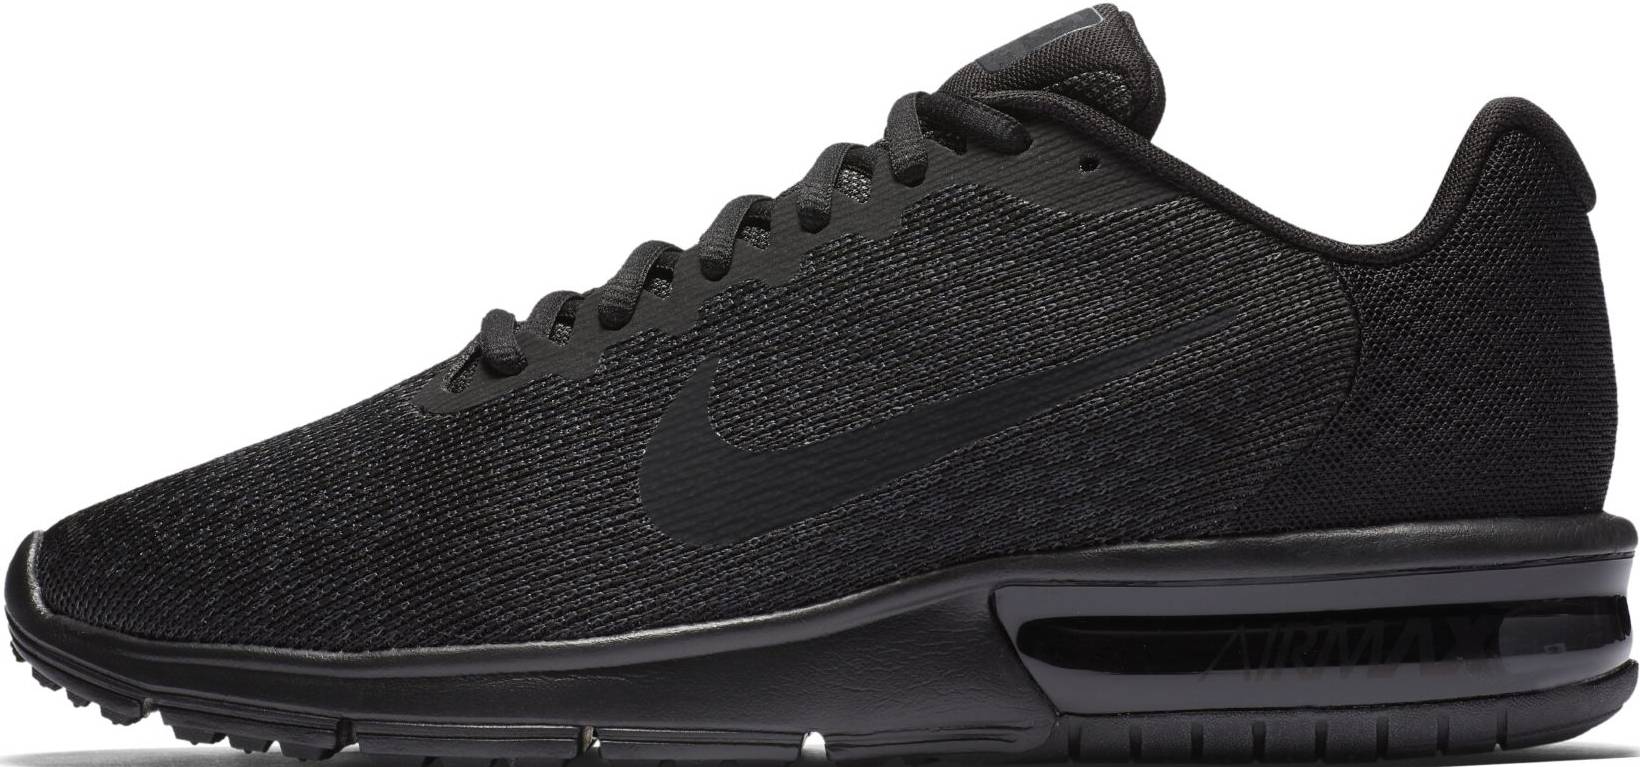 Nike Air Max Sequent 2 - Deals, Facts, Reviews (2021) | RunRepeat